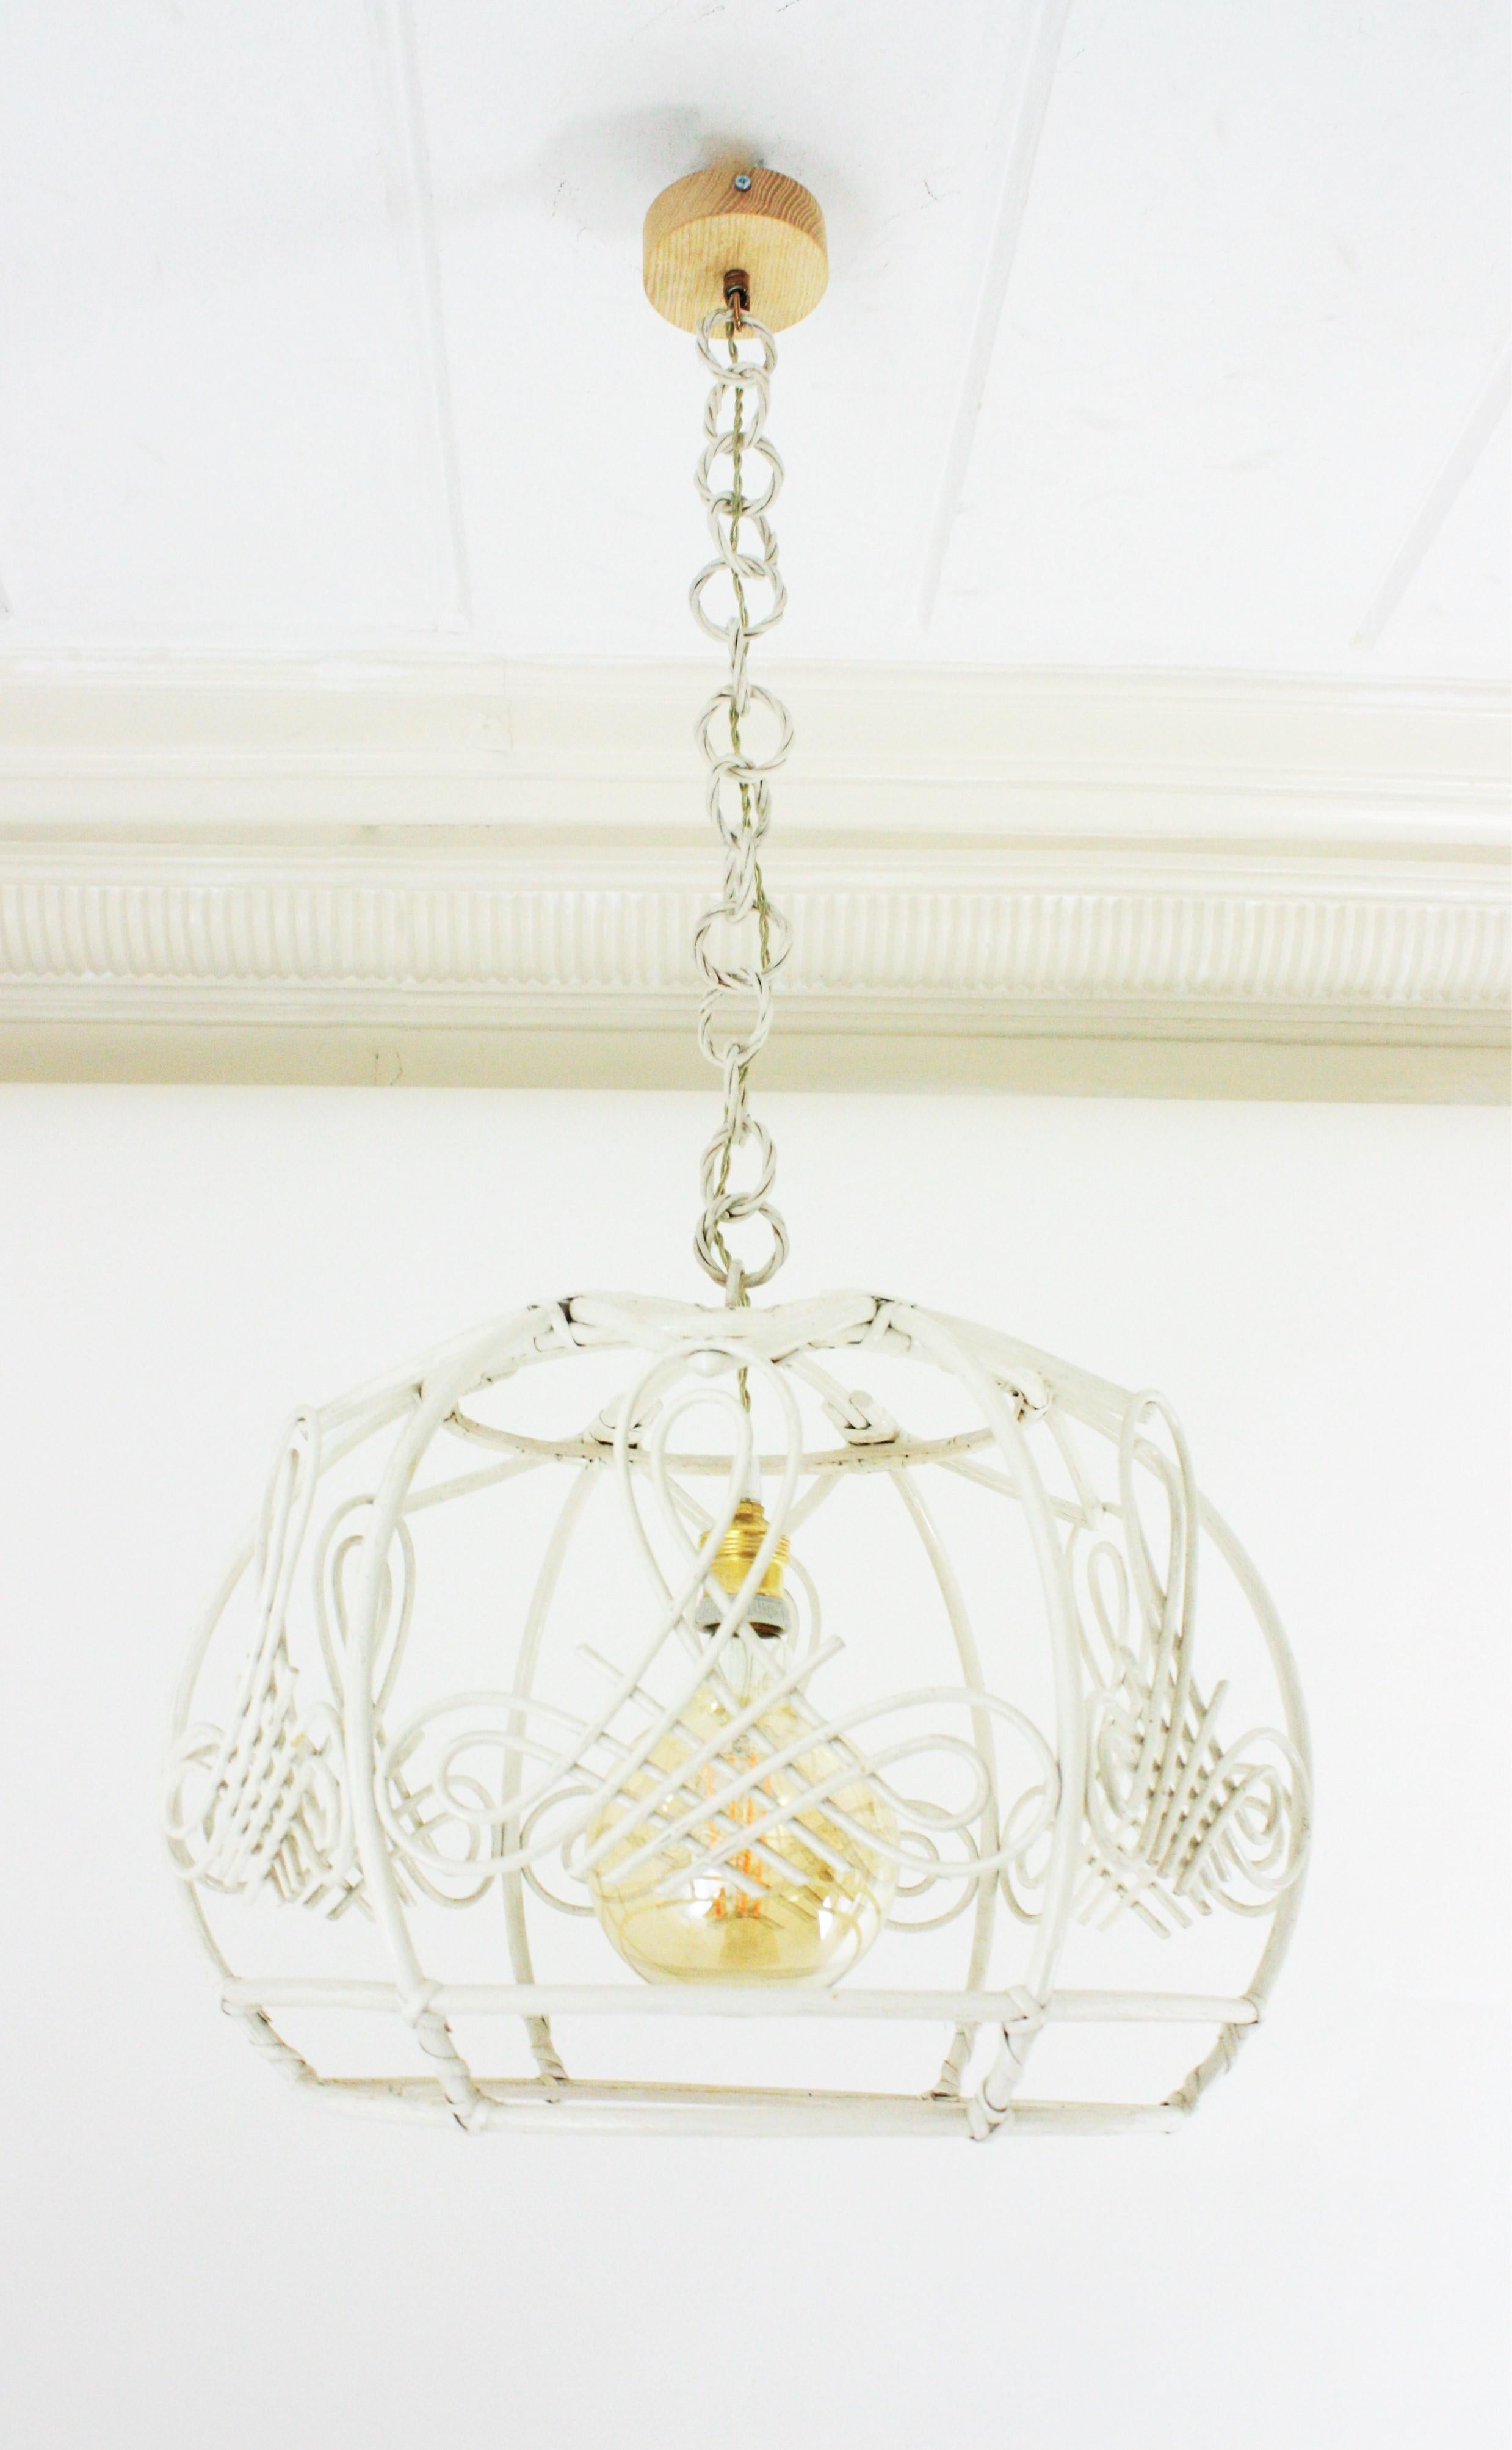 French Rattan Bell Pendant Lamp / Lantern in White Patina, 1960s For Sale 10